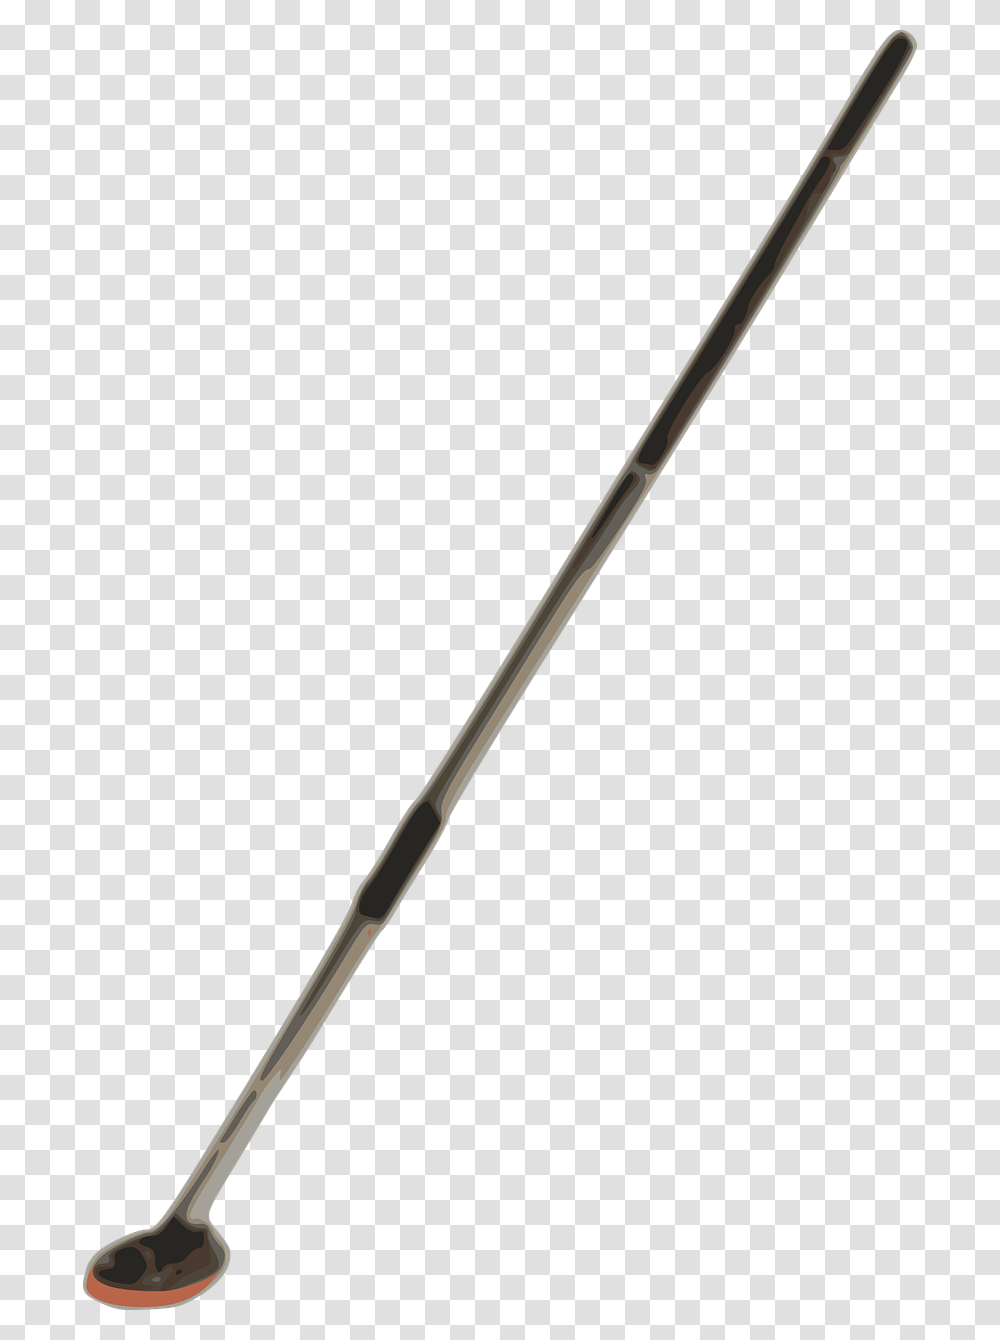 Skyrim Staff, Weapon, Weaponry, Spear Transparent Png